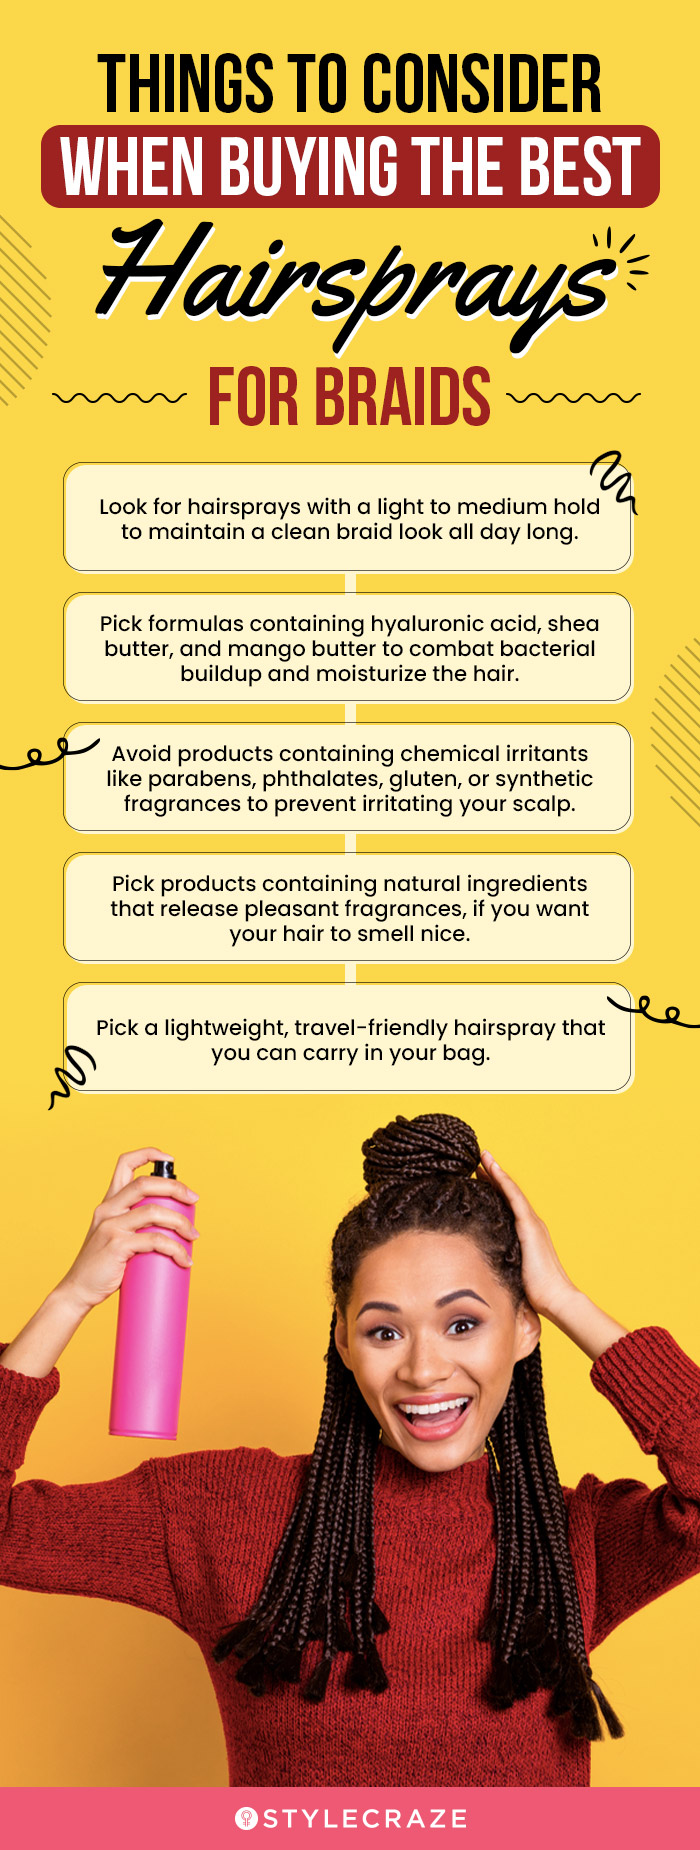 Things To Consider When Buying The Best Hairsprays For Braids (infographic)